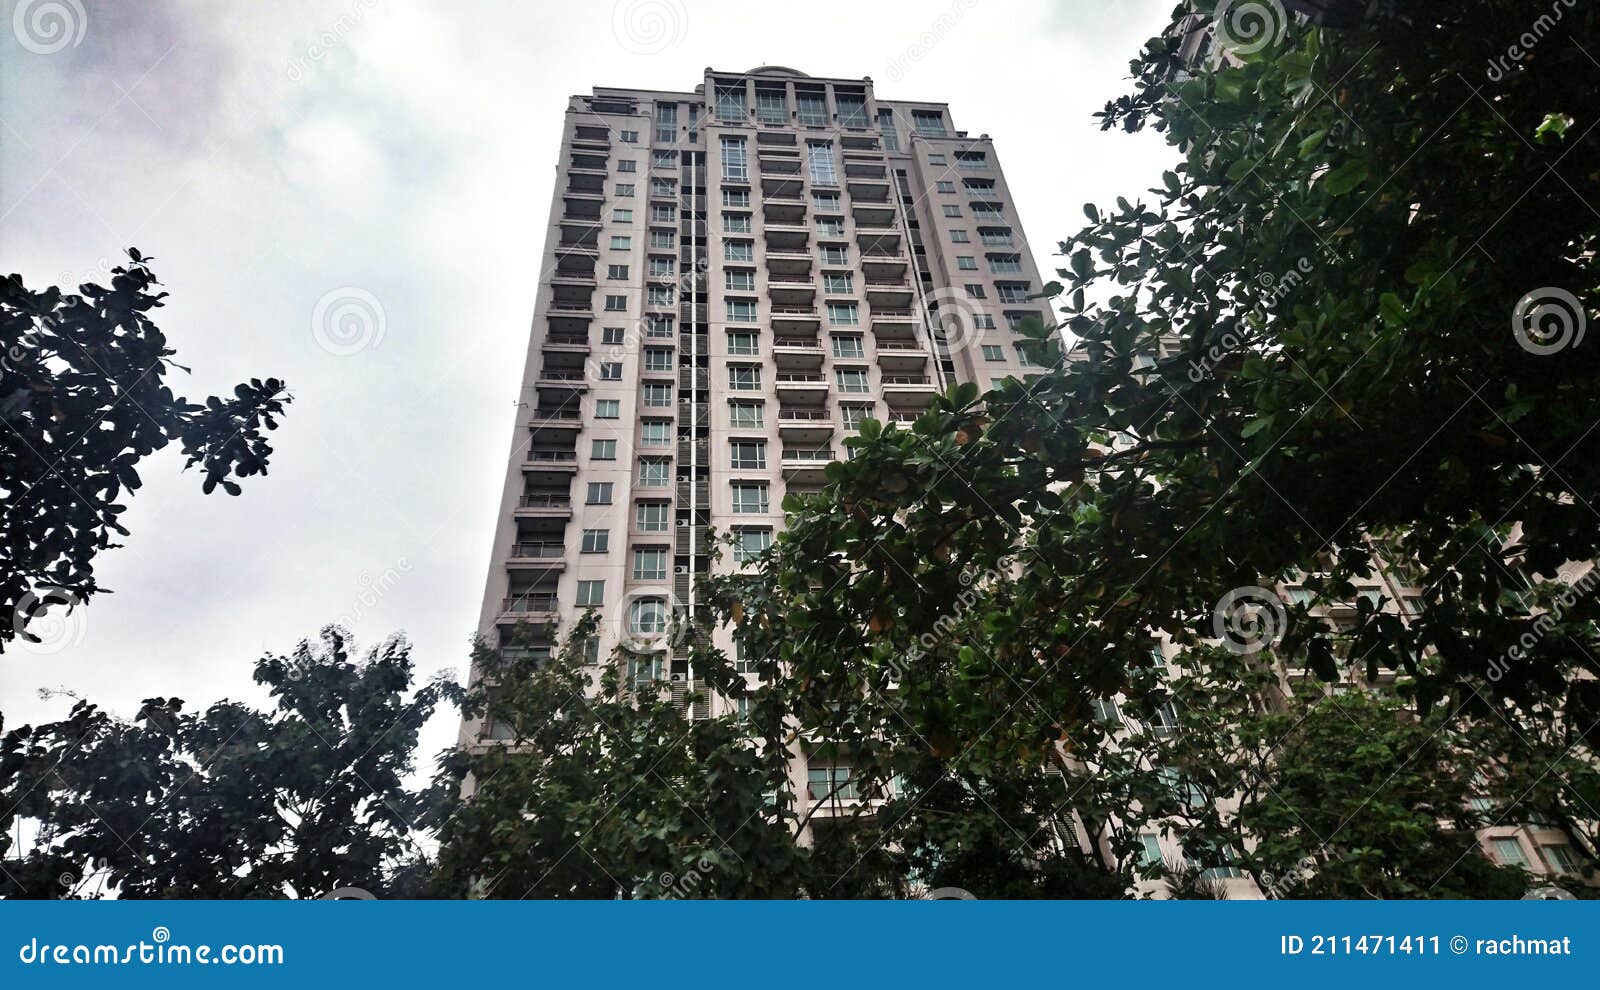 1 668 Apartment Jakarta Photos Free Royalty Free Stock Photos From Dreamstime